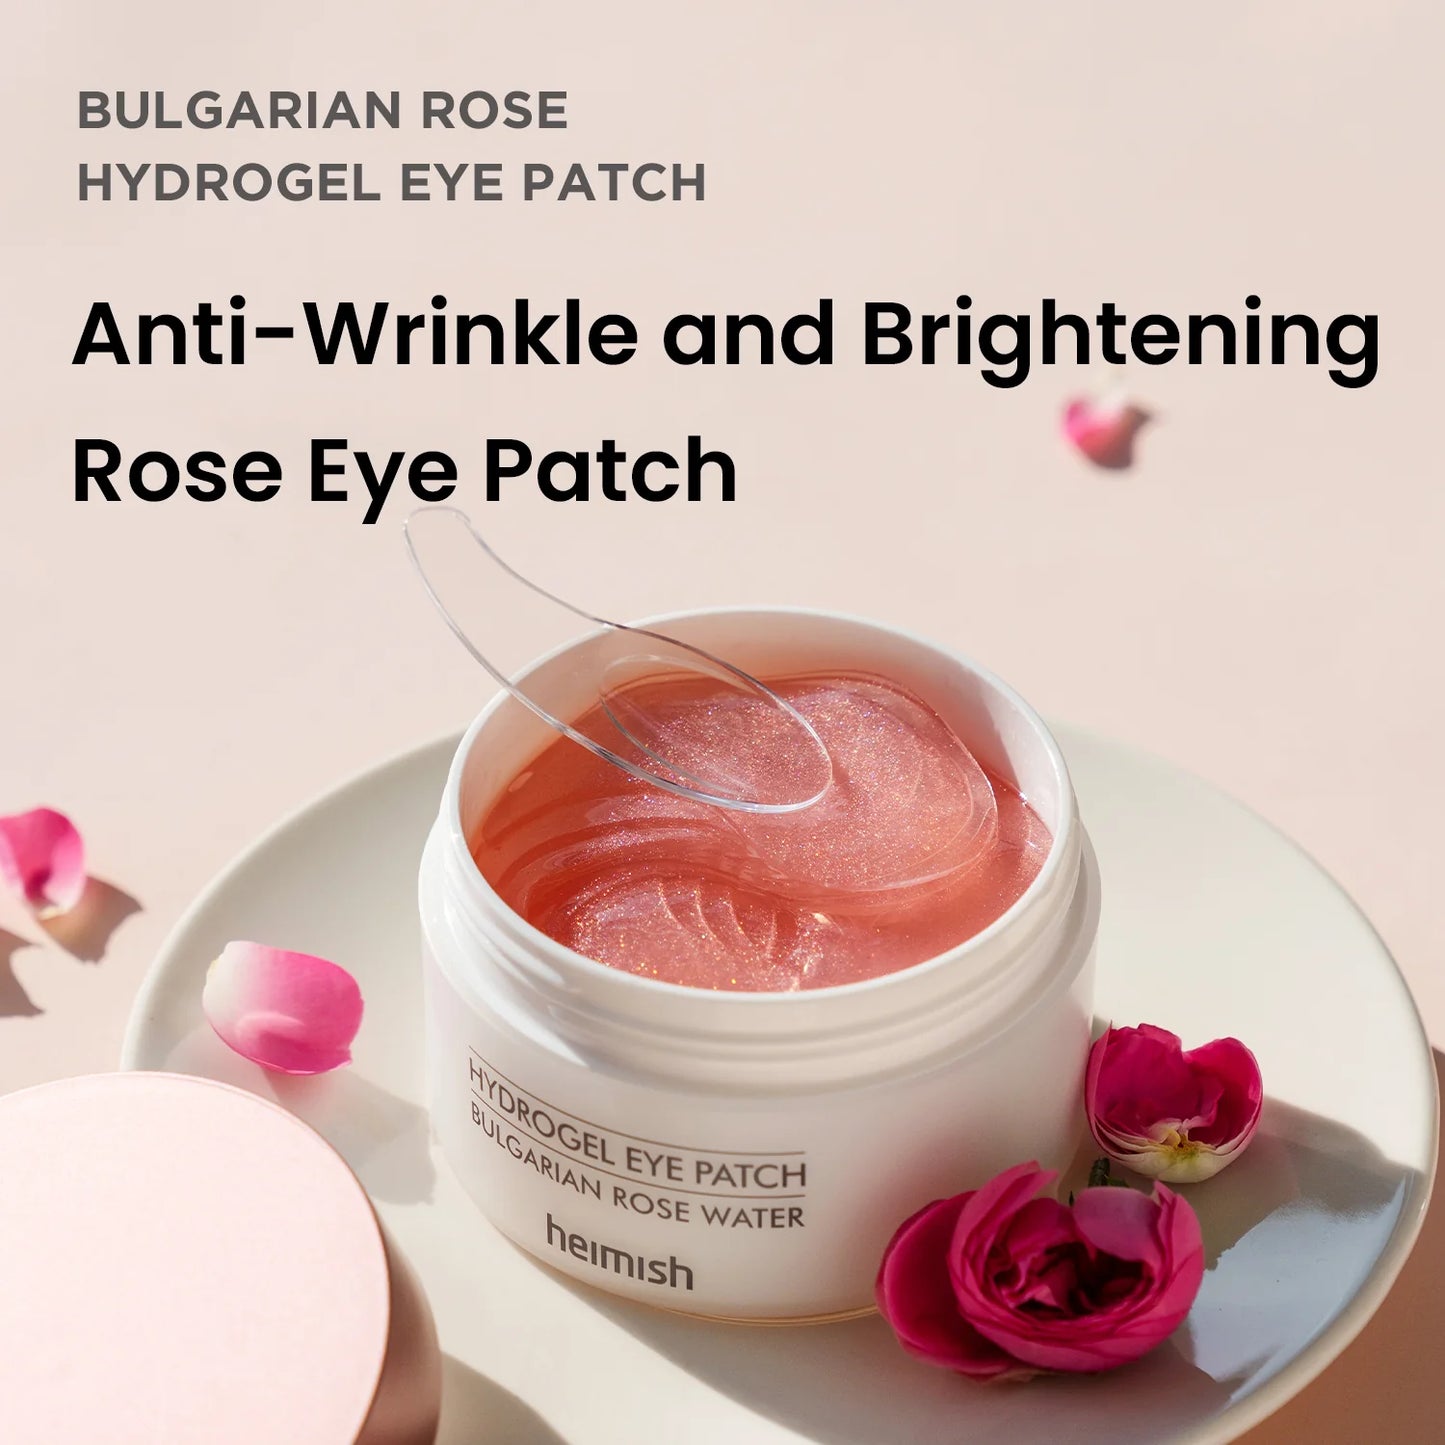 Bulgarian Rose Hydrogel Eye Patch is anti-wrinkle and brightening. 